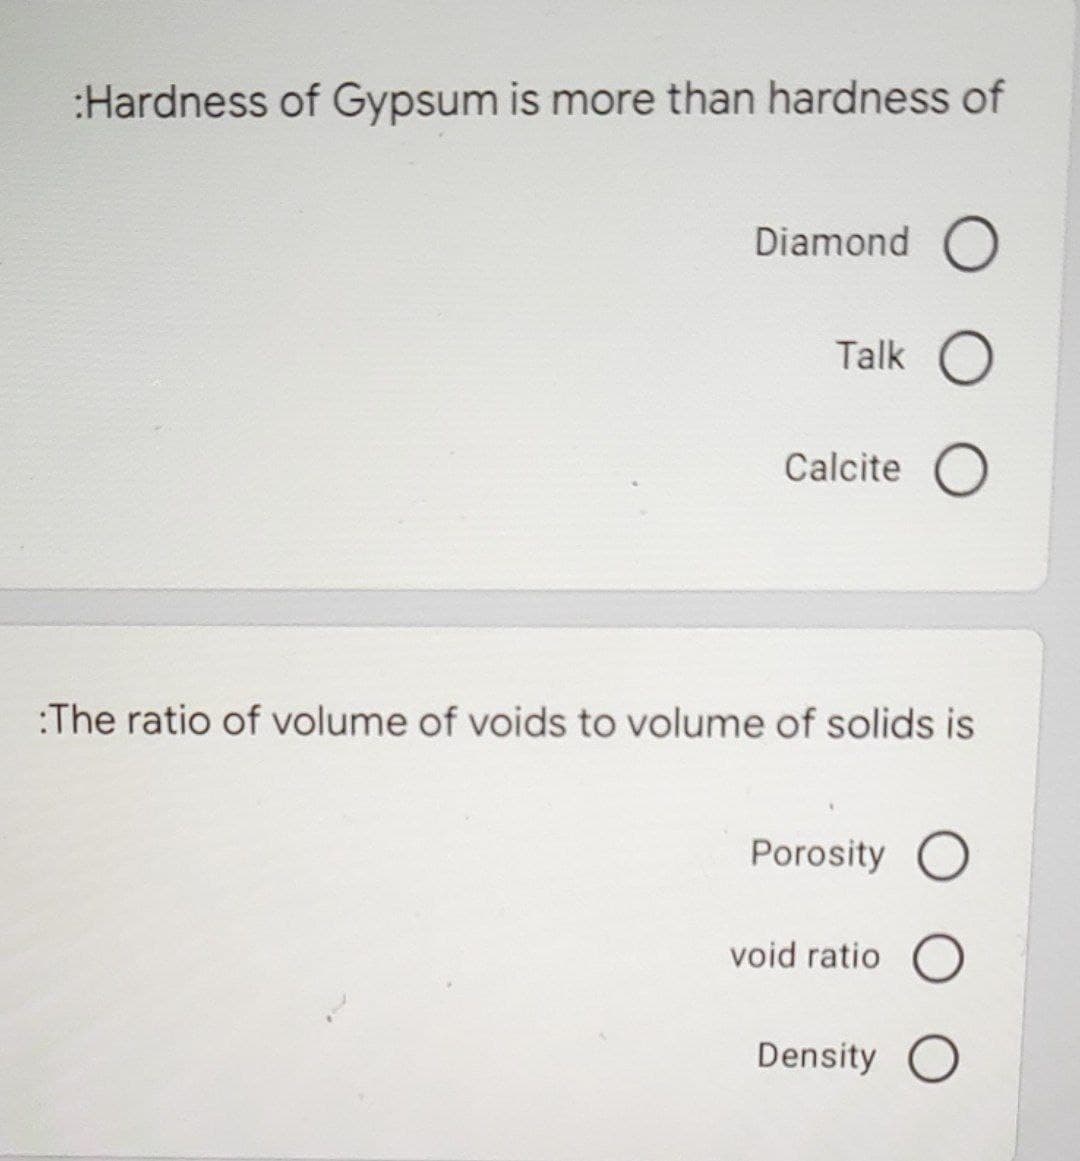 :Hardness of Gypsum is more than hardness of
Diamond O
Talk O
Calcite O
:The ratio of volume of voids to volume of solids is
Porosity O
void ratio O
Density O